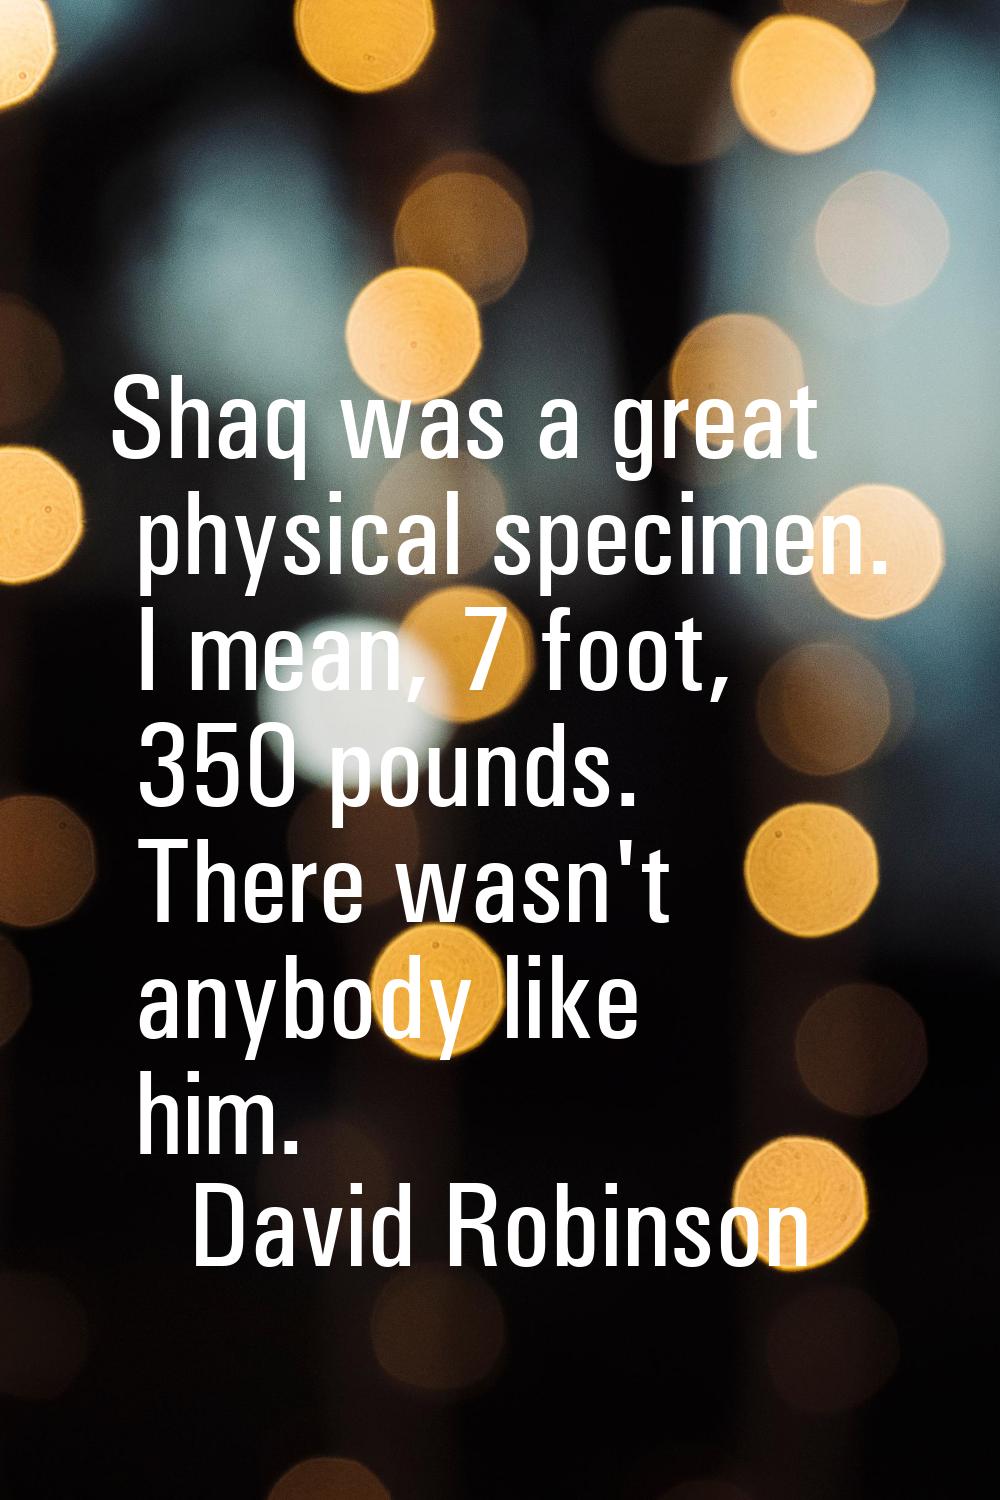 Shaq was a great physical specimen. I mean, 7 foot, 350 pounds. There wasn't anybody like him.